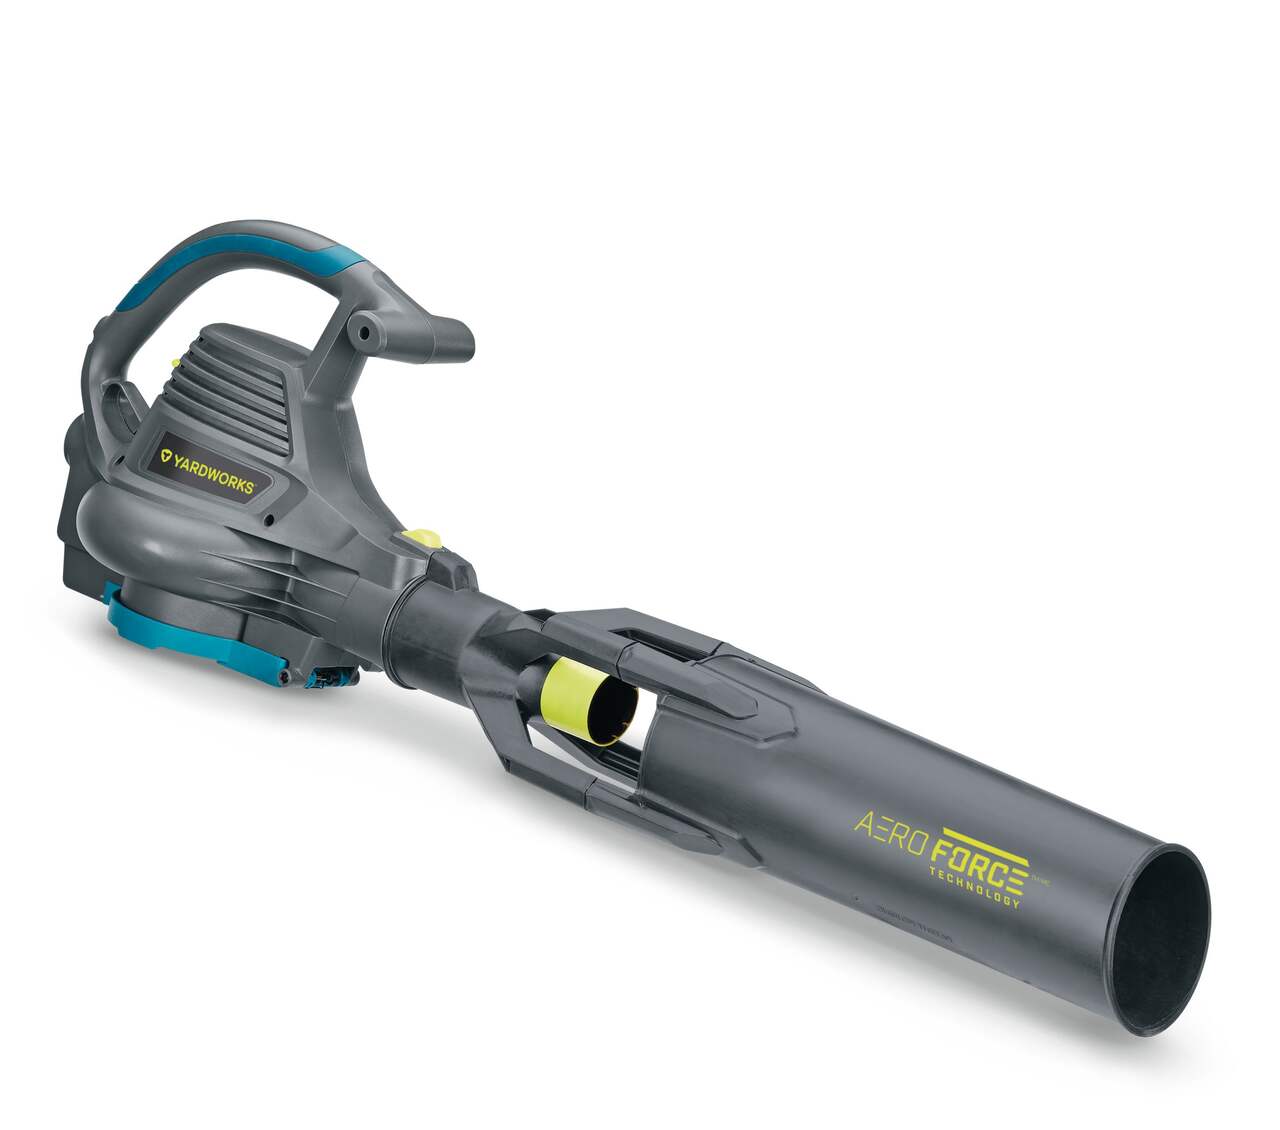 https://media-www.canadiantire.ca/product/seasonal-gardening/outdoor-tools/hand-held-outdoor-power-tools/0603775/yardworks-12a-blower-vac-with-aero-force-technology-09c31363-1c05-4650-bdc0-3067f1798aa5-jpgrendition.jpg?imdensity=1&imwidth=640&impolicy=mZoom